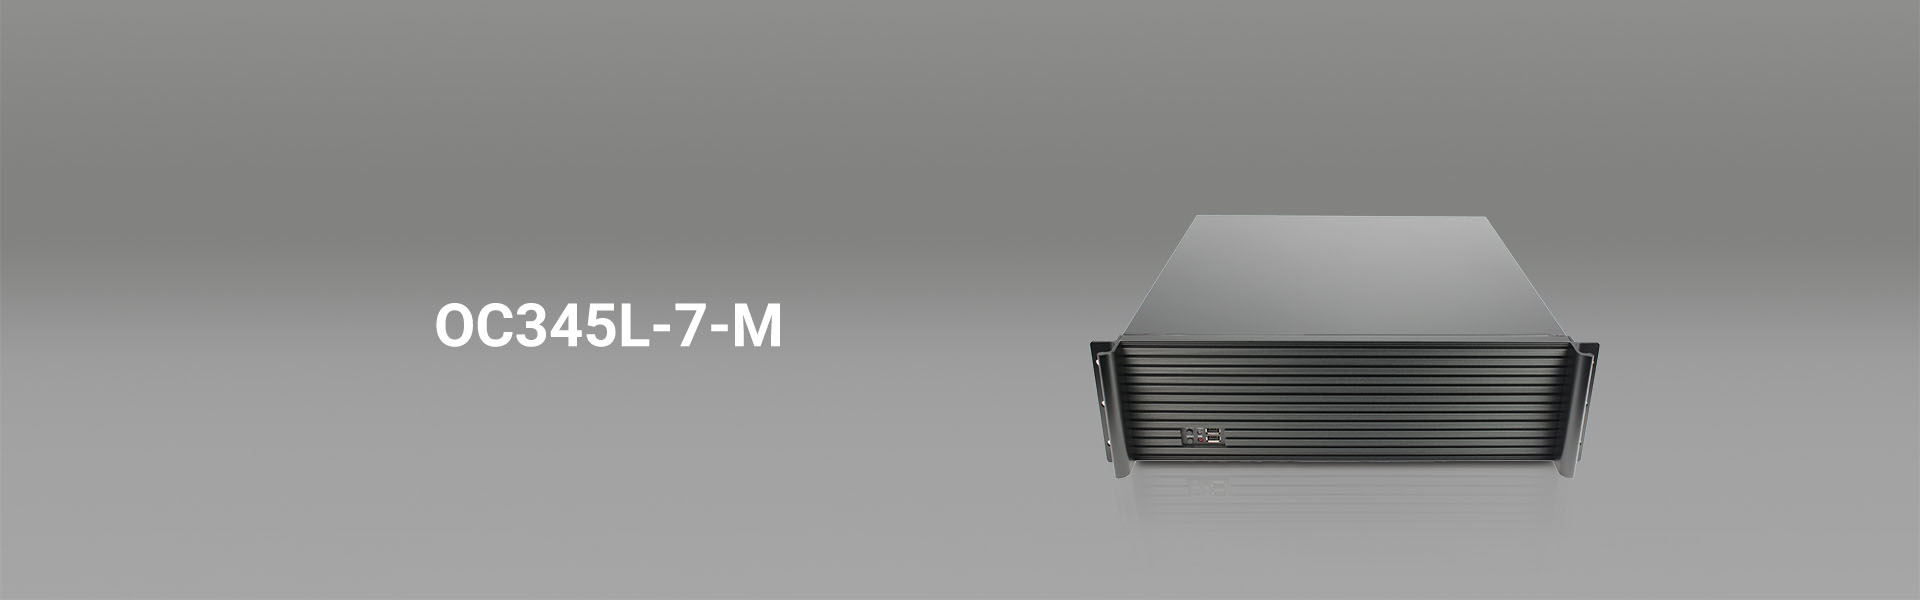 rackmount chassis-OC345L-7-M onechassis-banner